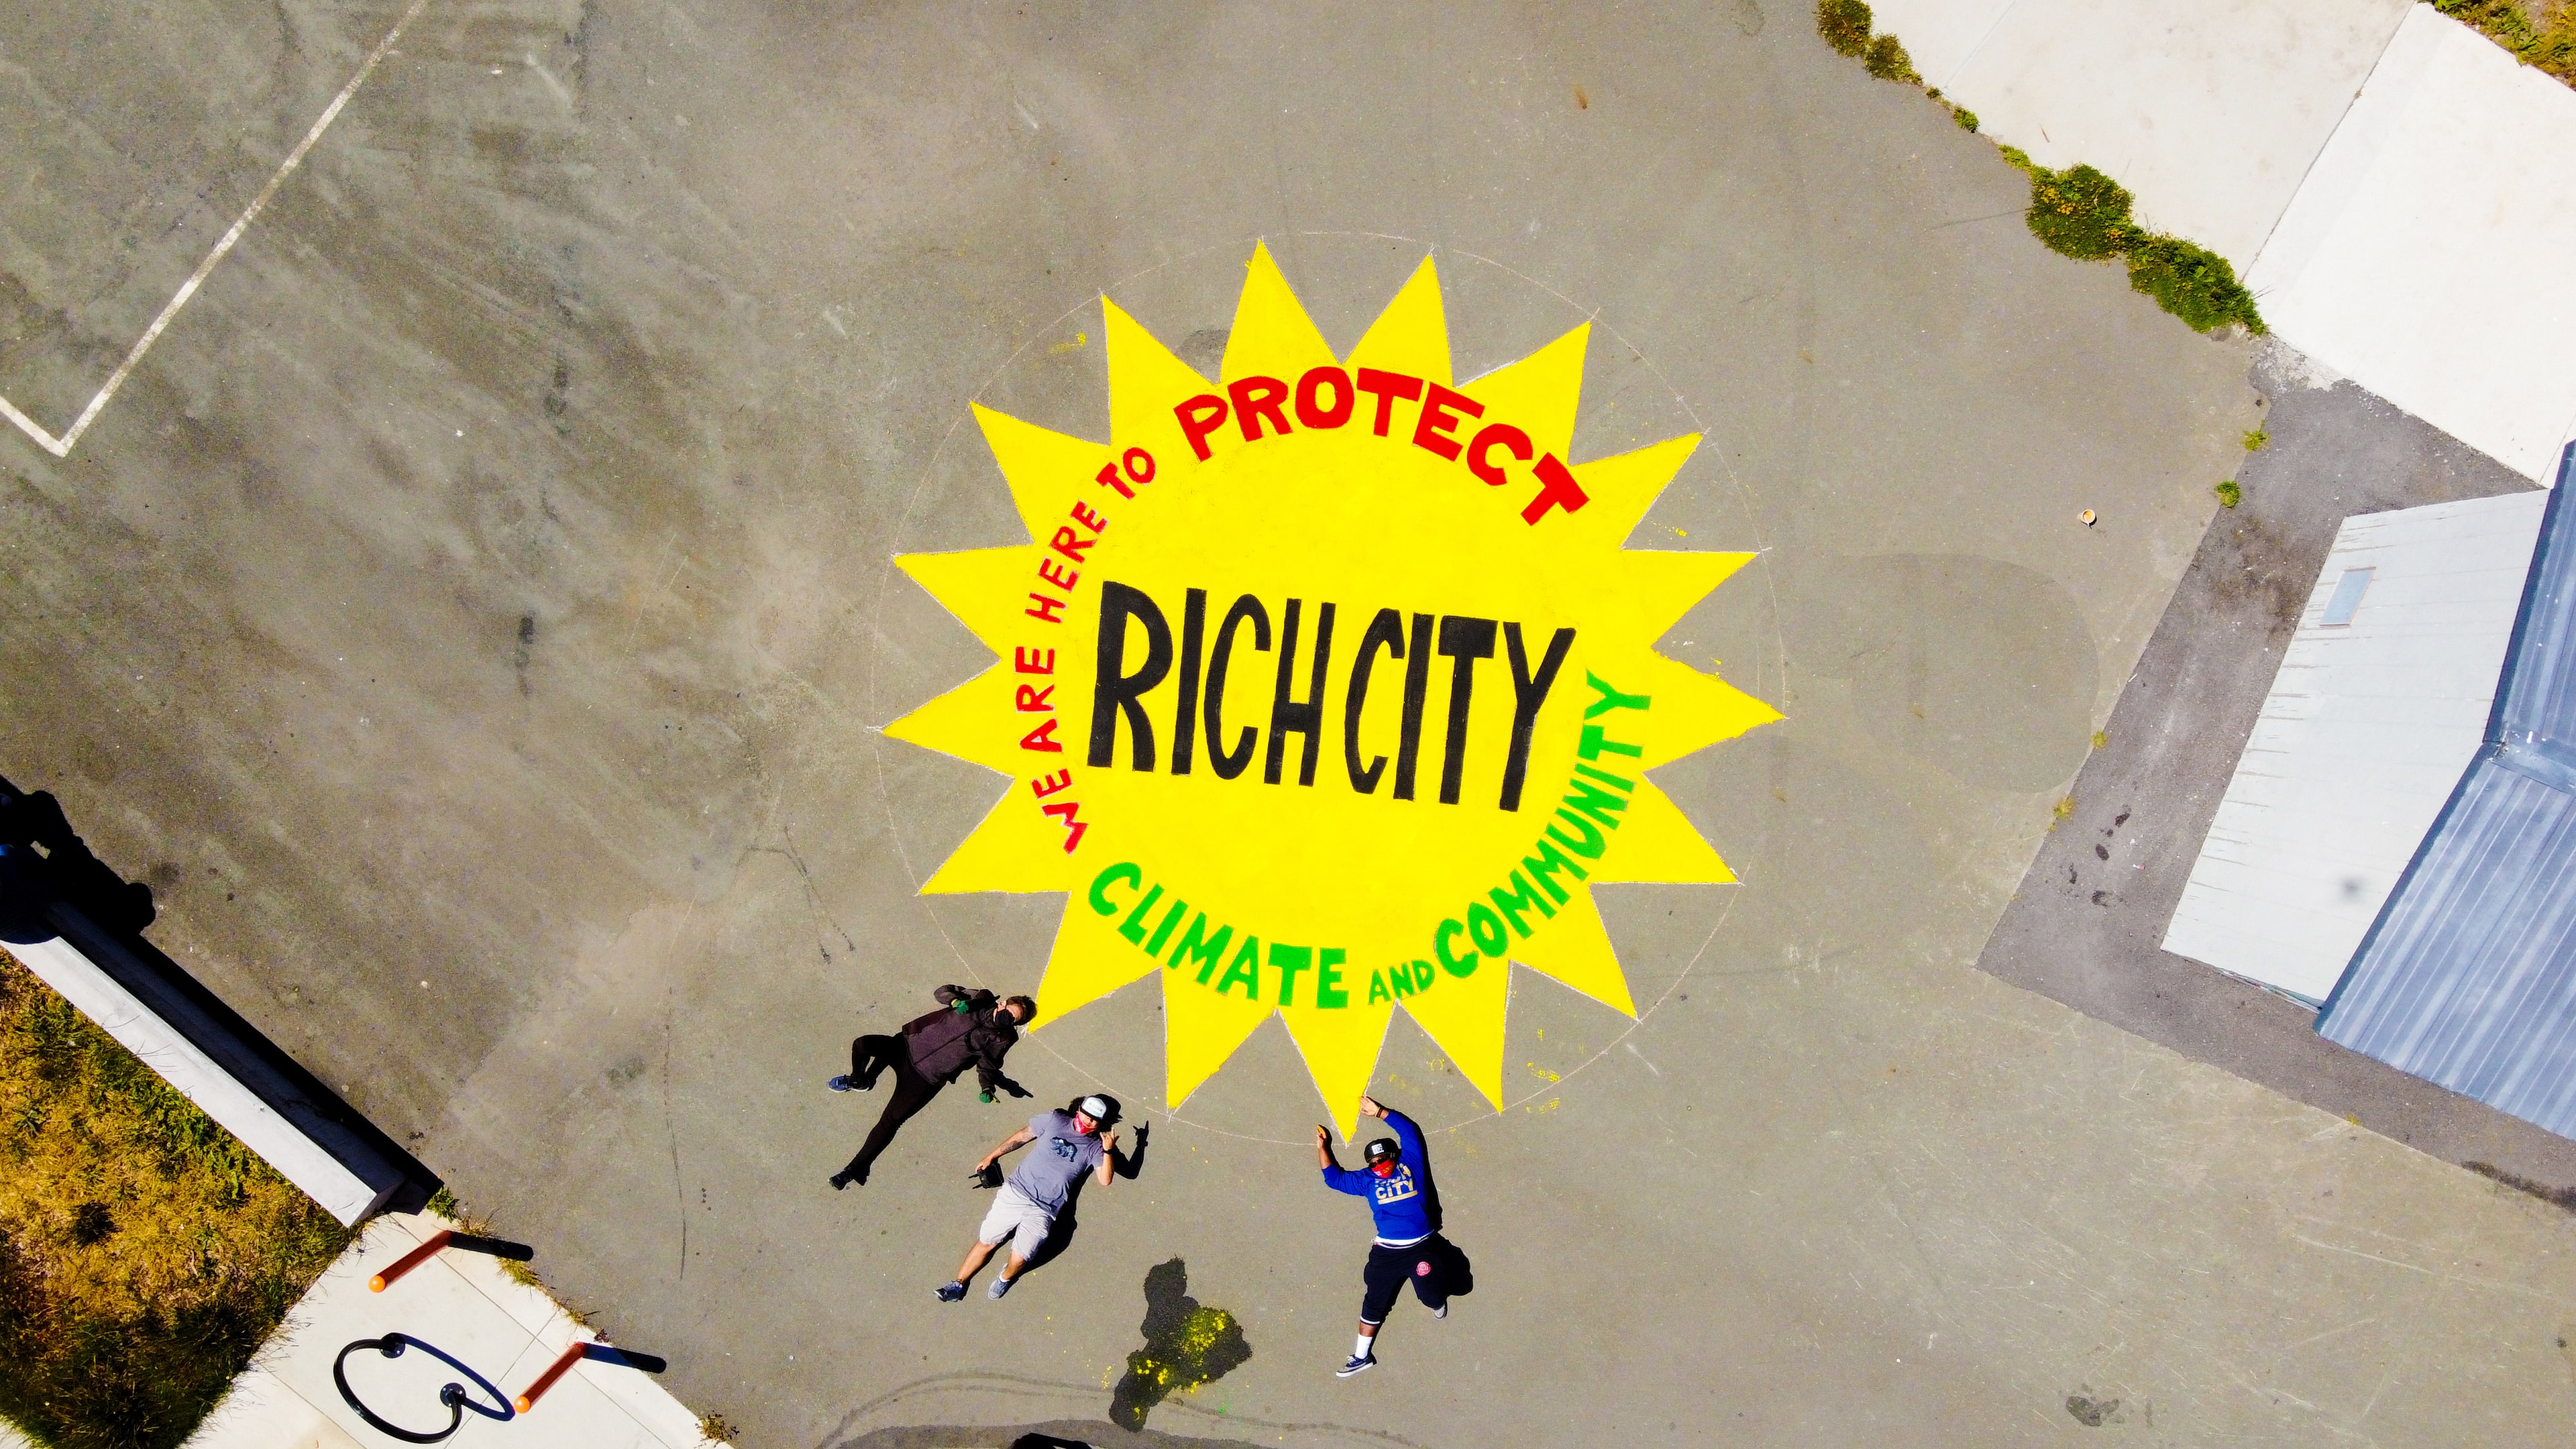 Climate Strike Mural. Richmond, CA, 2021. Lead Artist: David Solnit. Photo by Shots from Richmond